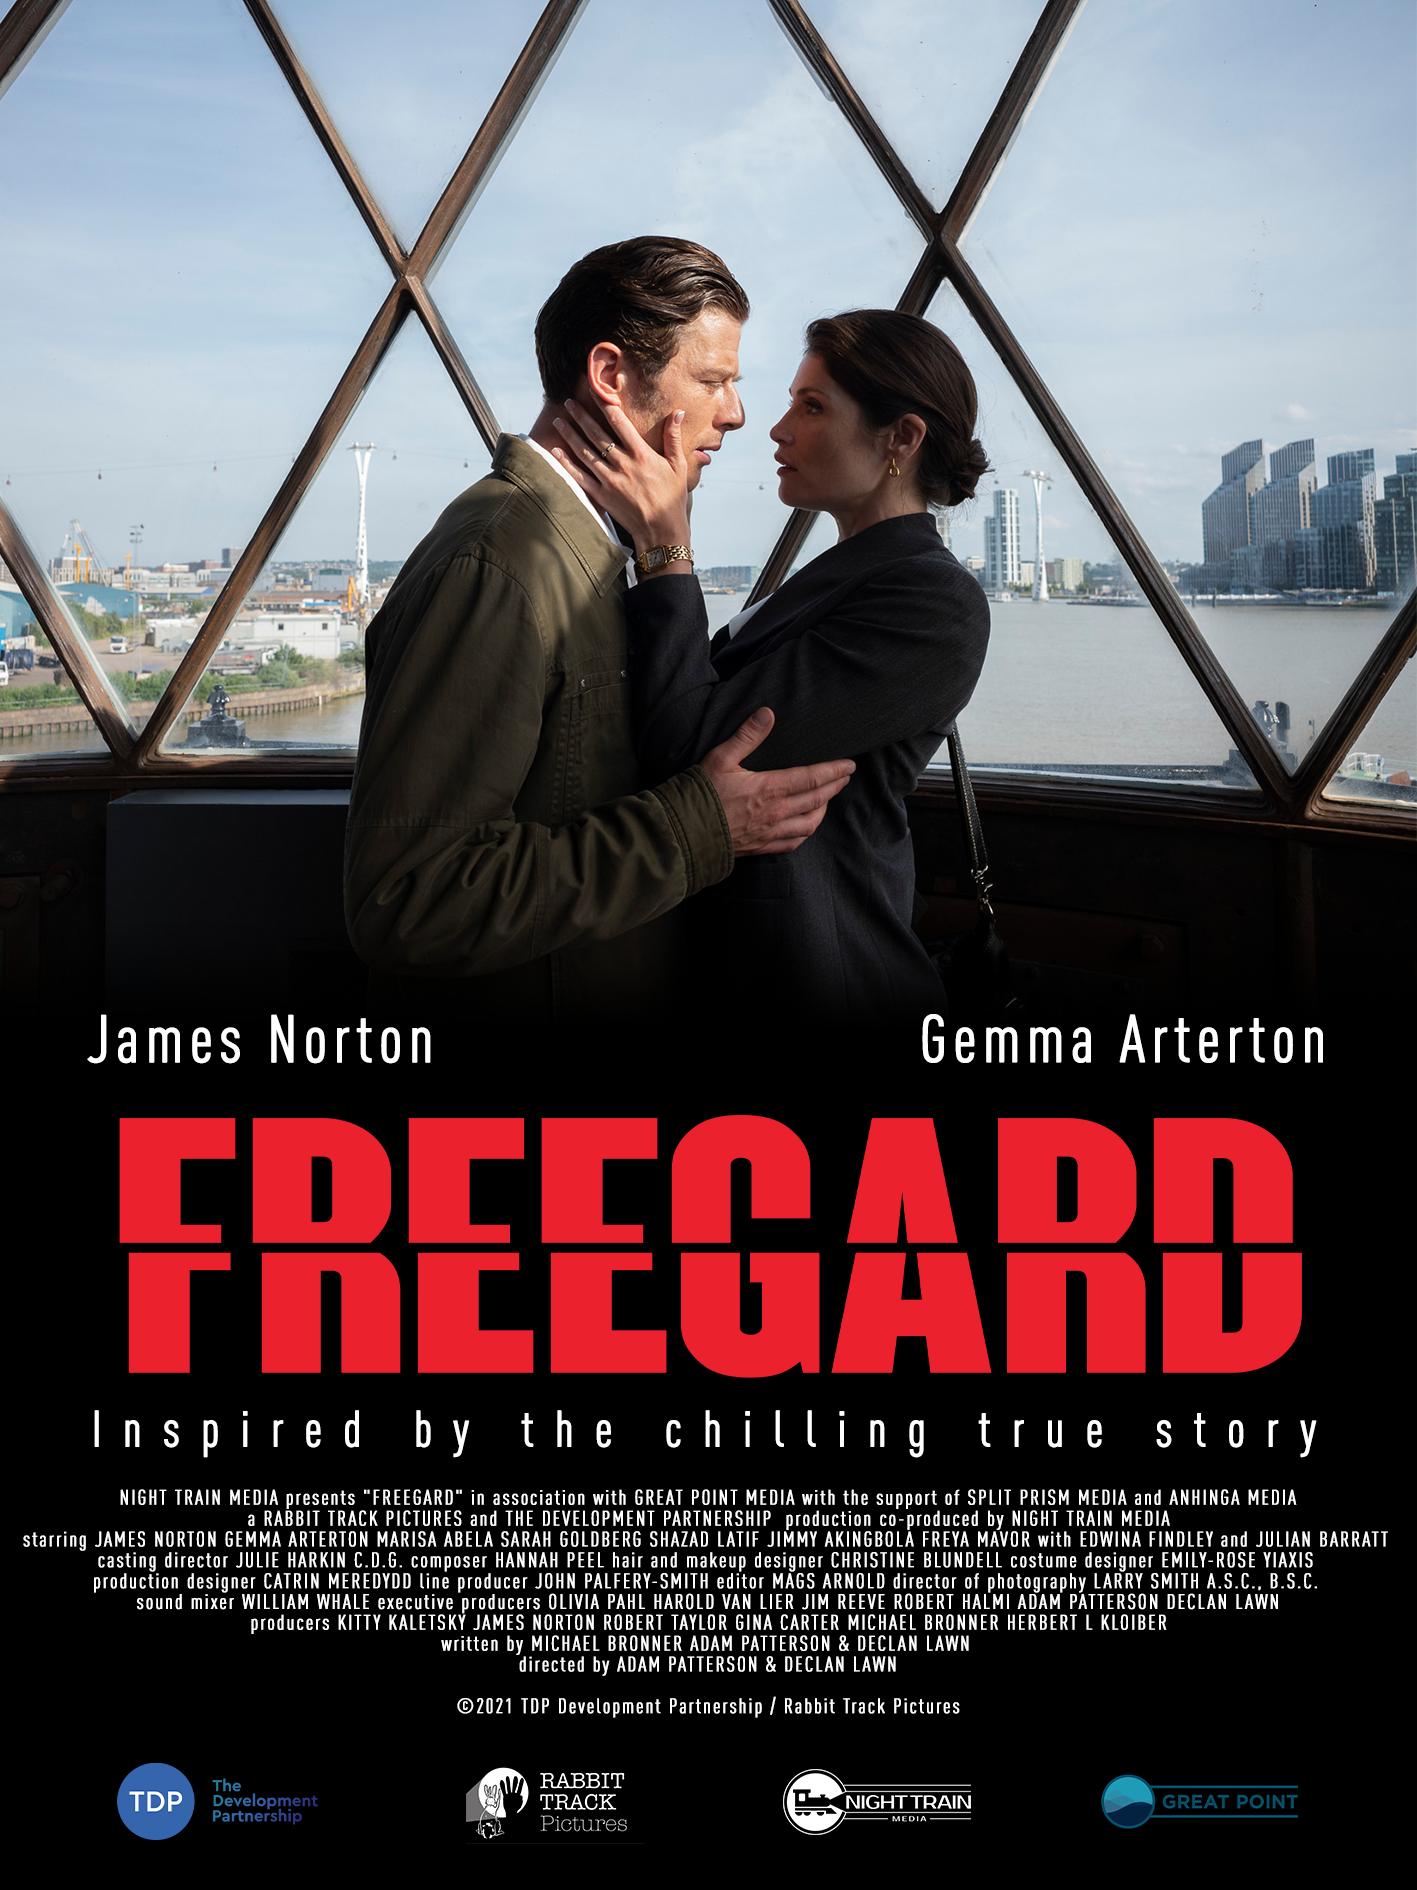 Freegard Movie 2022, Official Trailer, Release Date, HD Poster